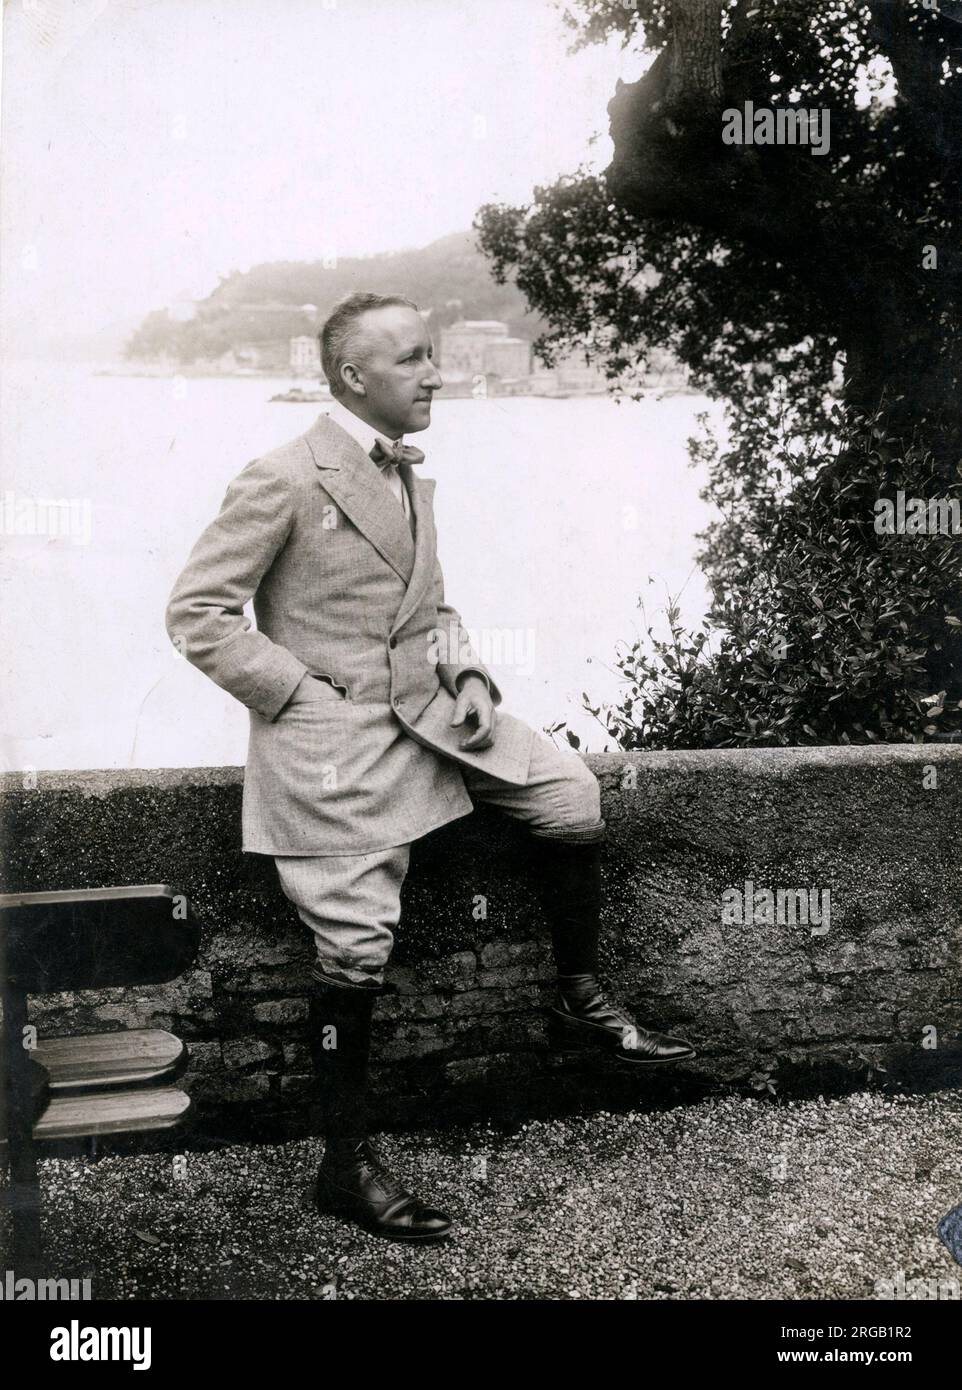 Early 20th century vintage press photograph - Siegfried Helferich Richard Wagner (6 June 1869 - 4 August 1930) was a German composer and conductor, the son of Richard Wagner. He was an opera composer and the artistic director of the Bayreuth Festival from 1908 to 1930, photographed near Genoa, Italy., c.1920s Stock Photo